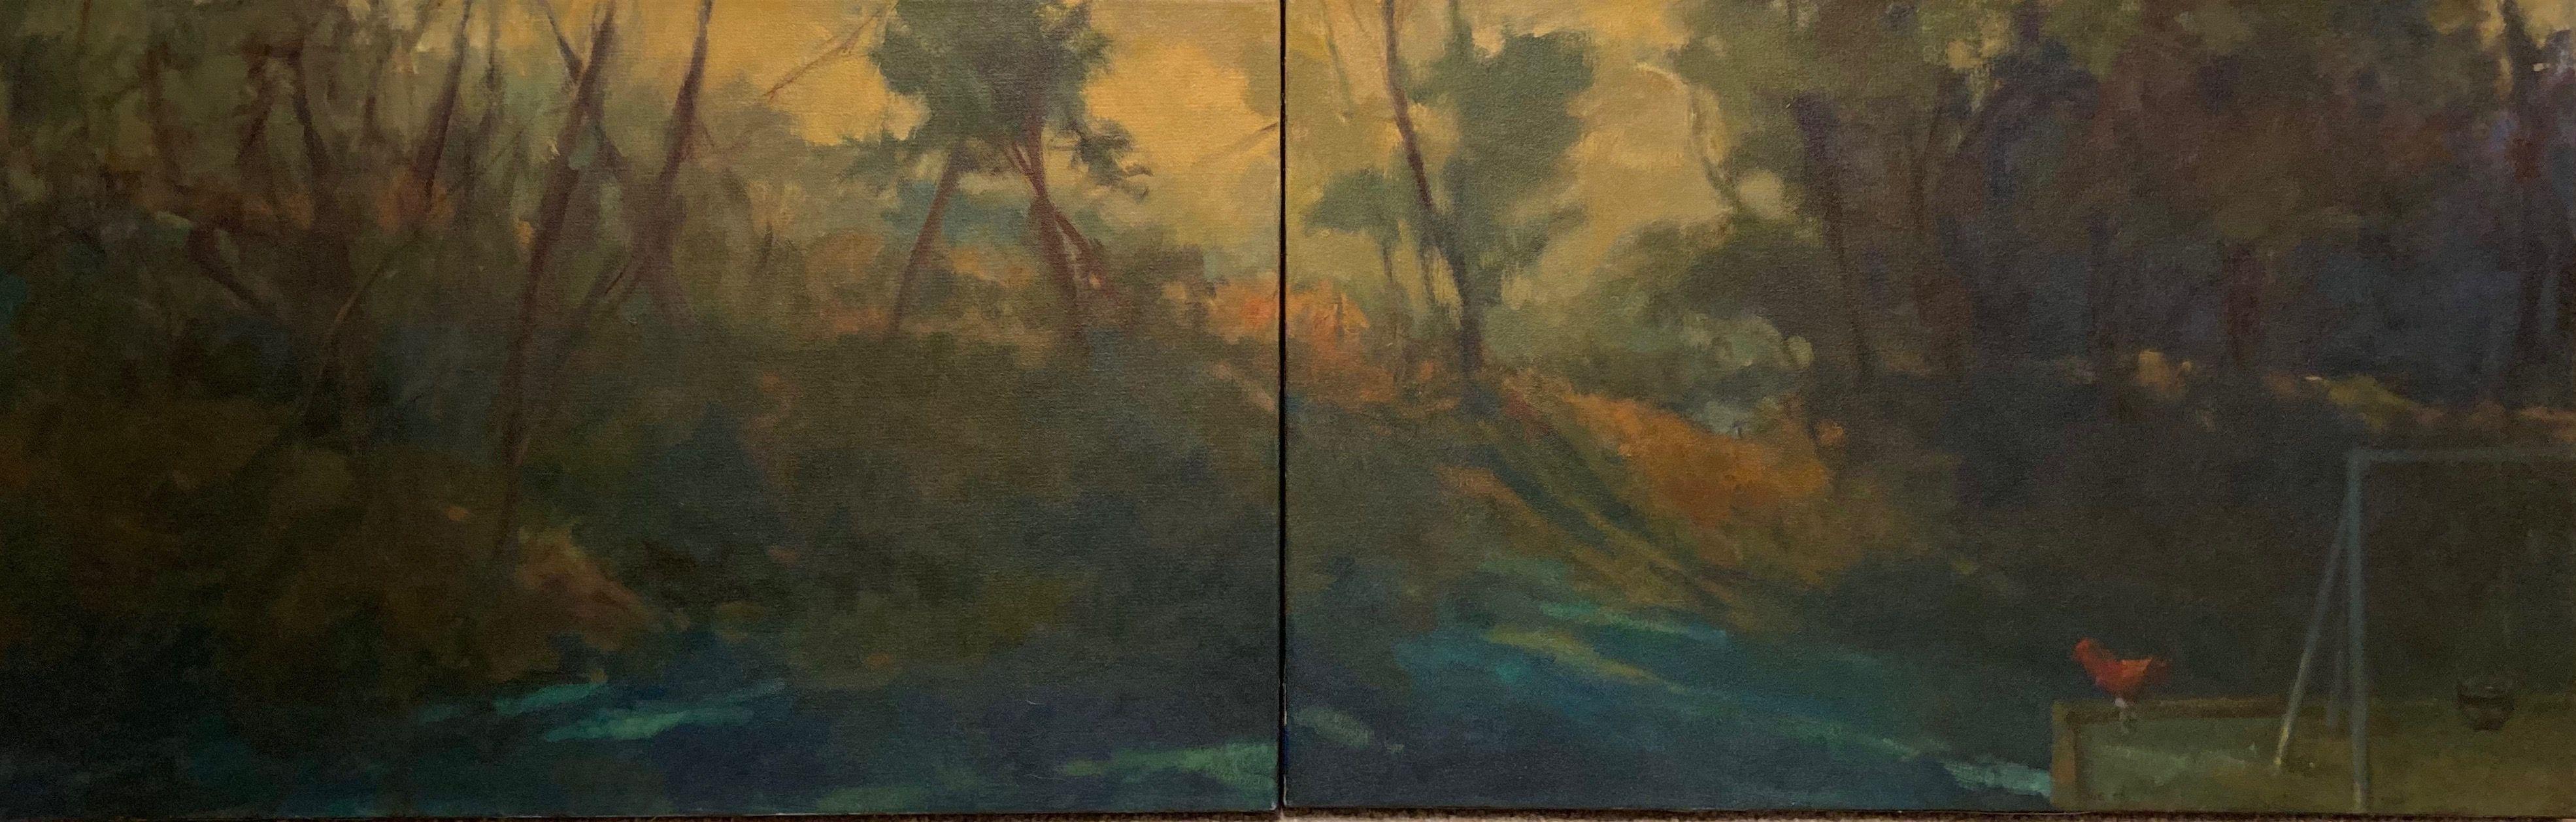 This diptych explores a playground at dusk, when the swings and riding toy are abandoned waiting for the children to return. This time of day has always been my favorite for painting landscapes.  When my daughter was young, we used to frequent this